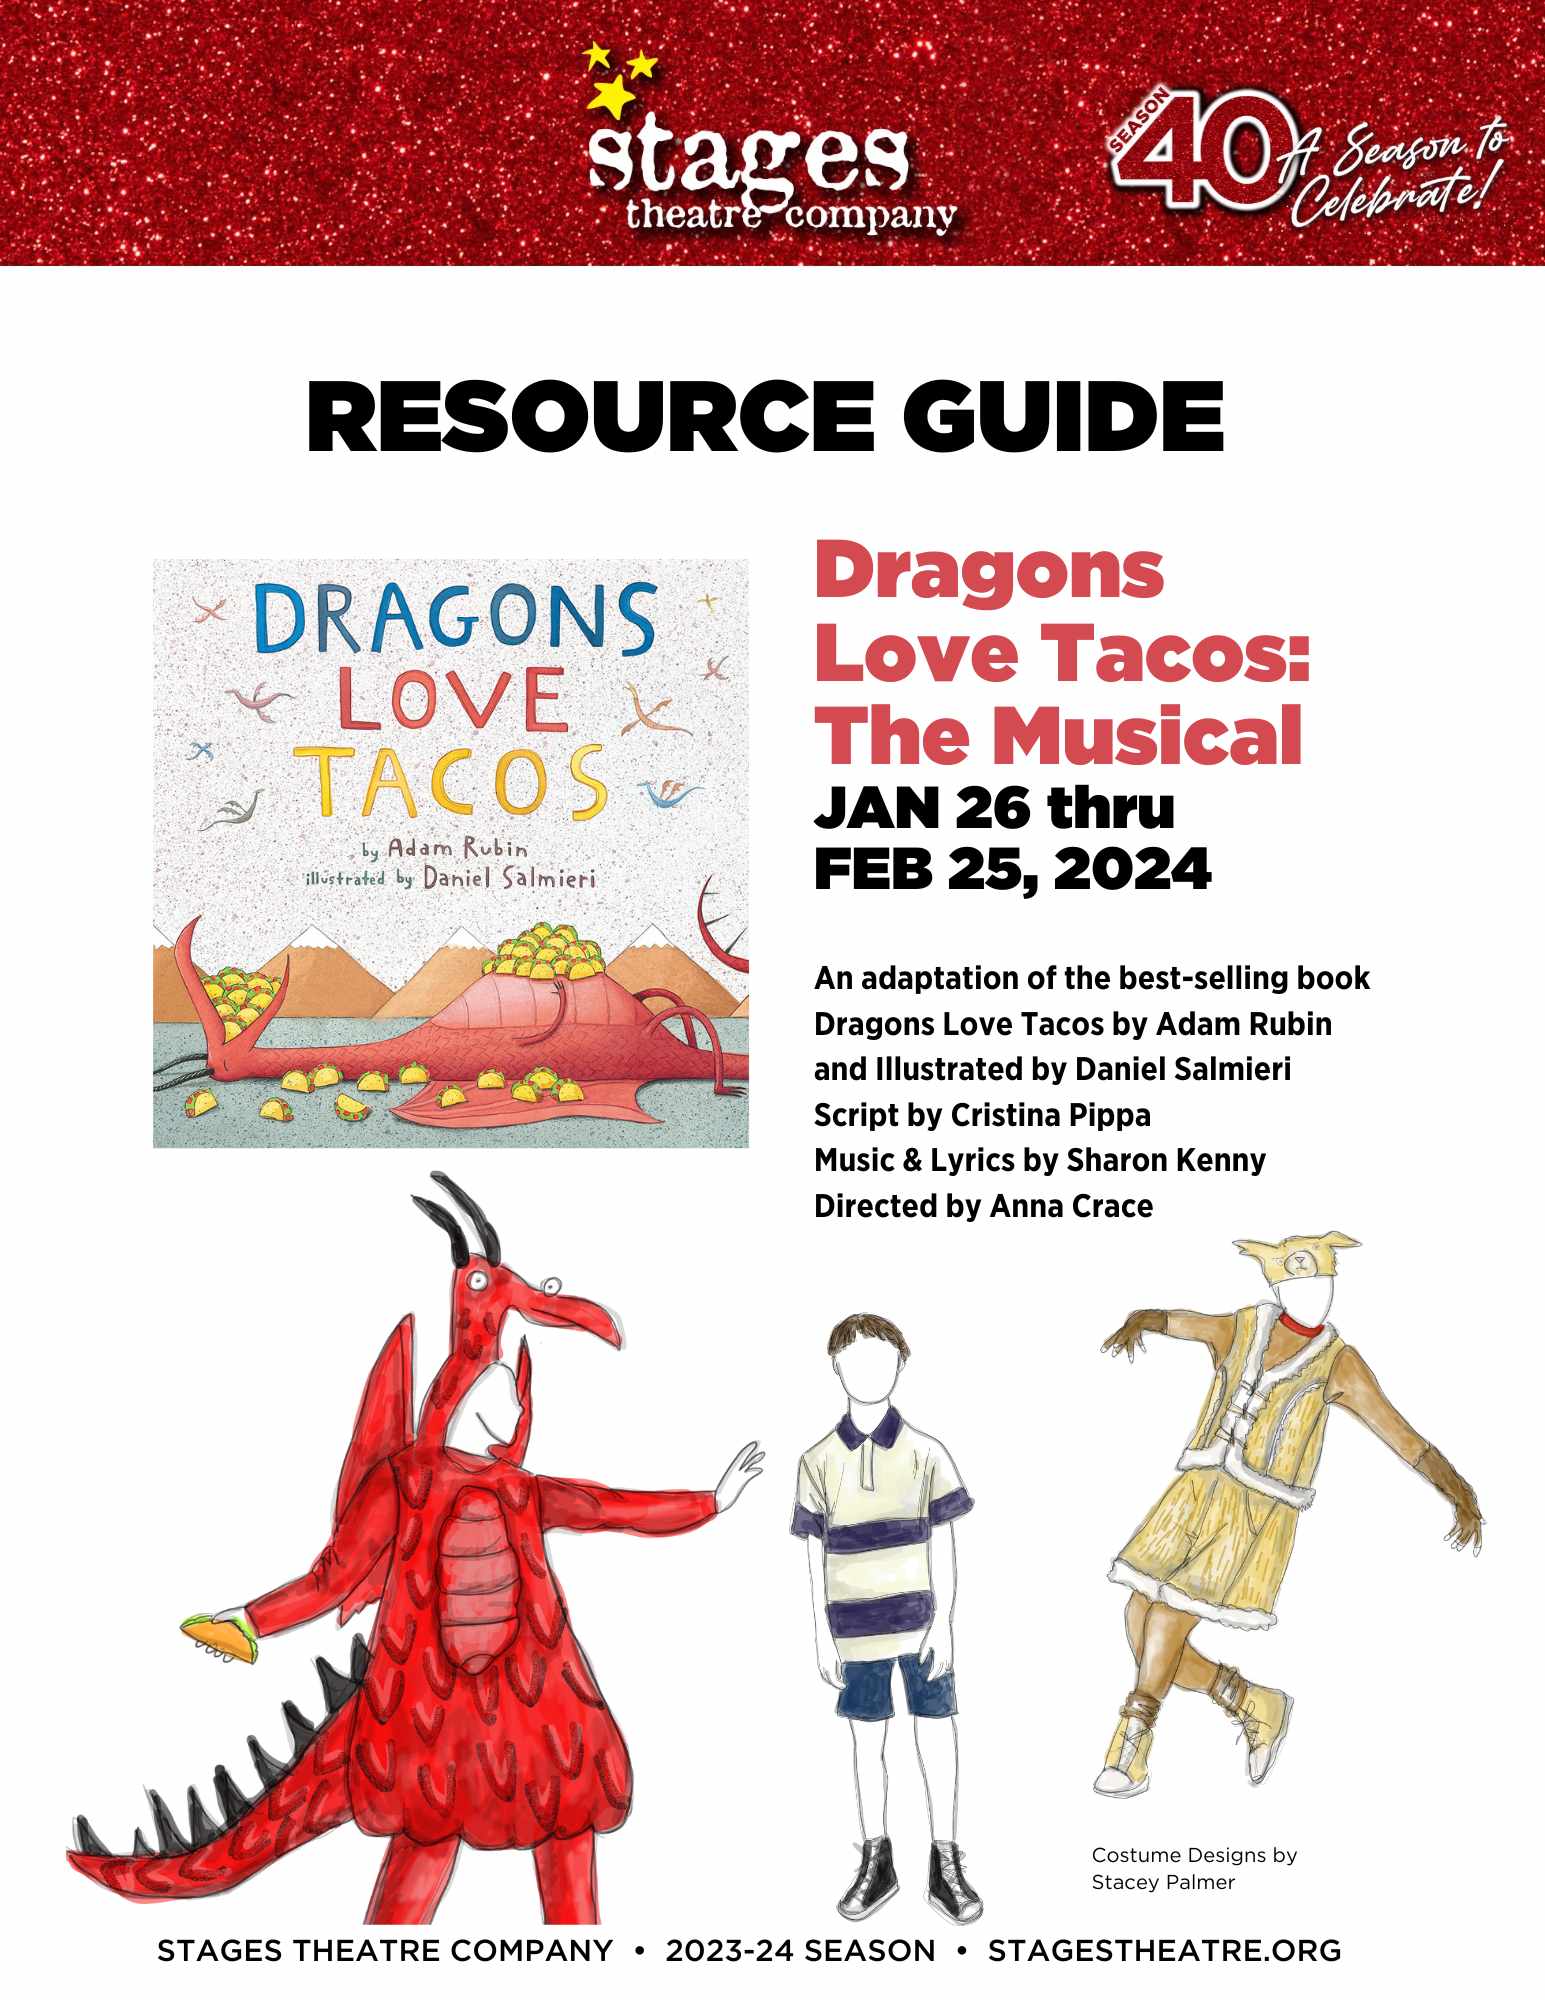 STC 23-24 RESOURCE GUIDE-04-Dragons (1)